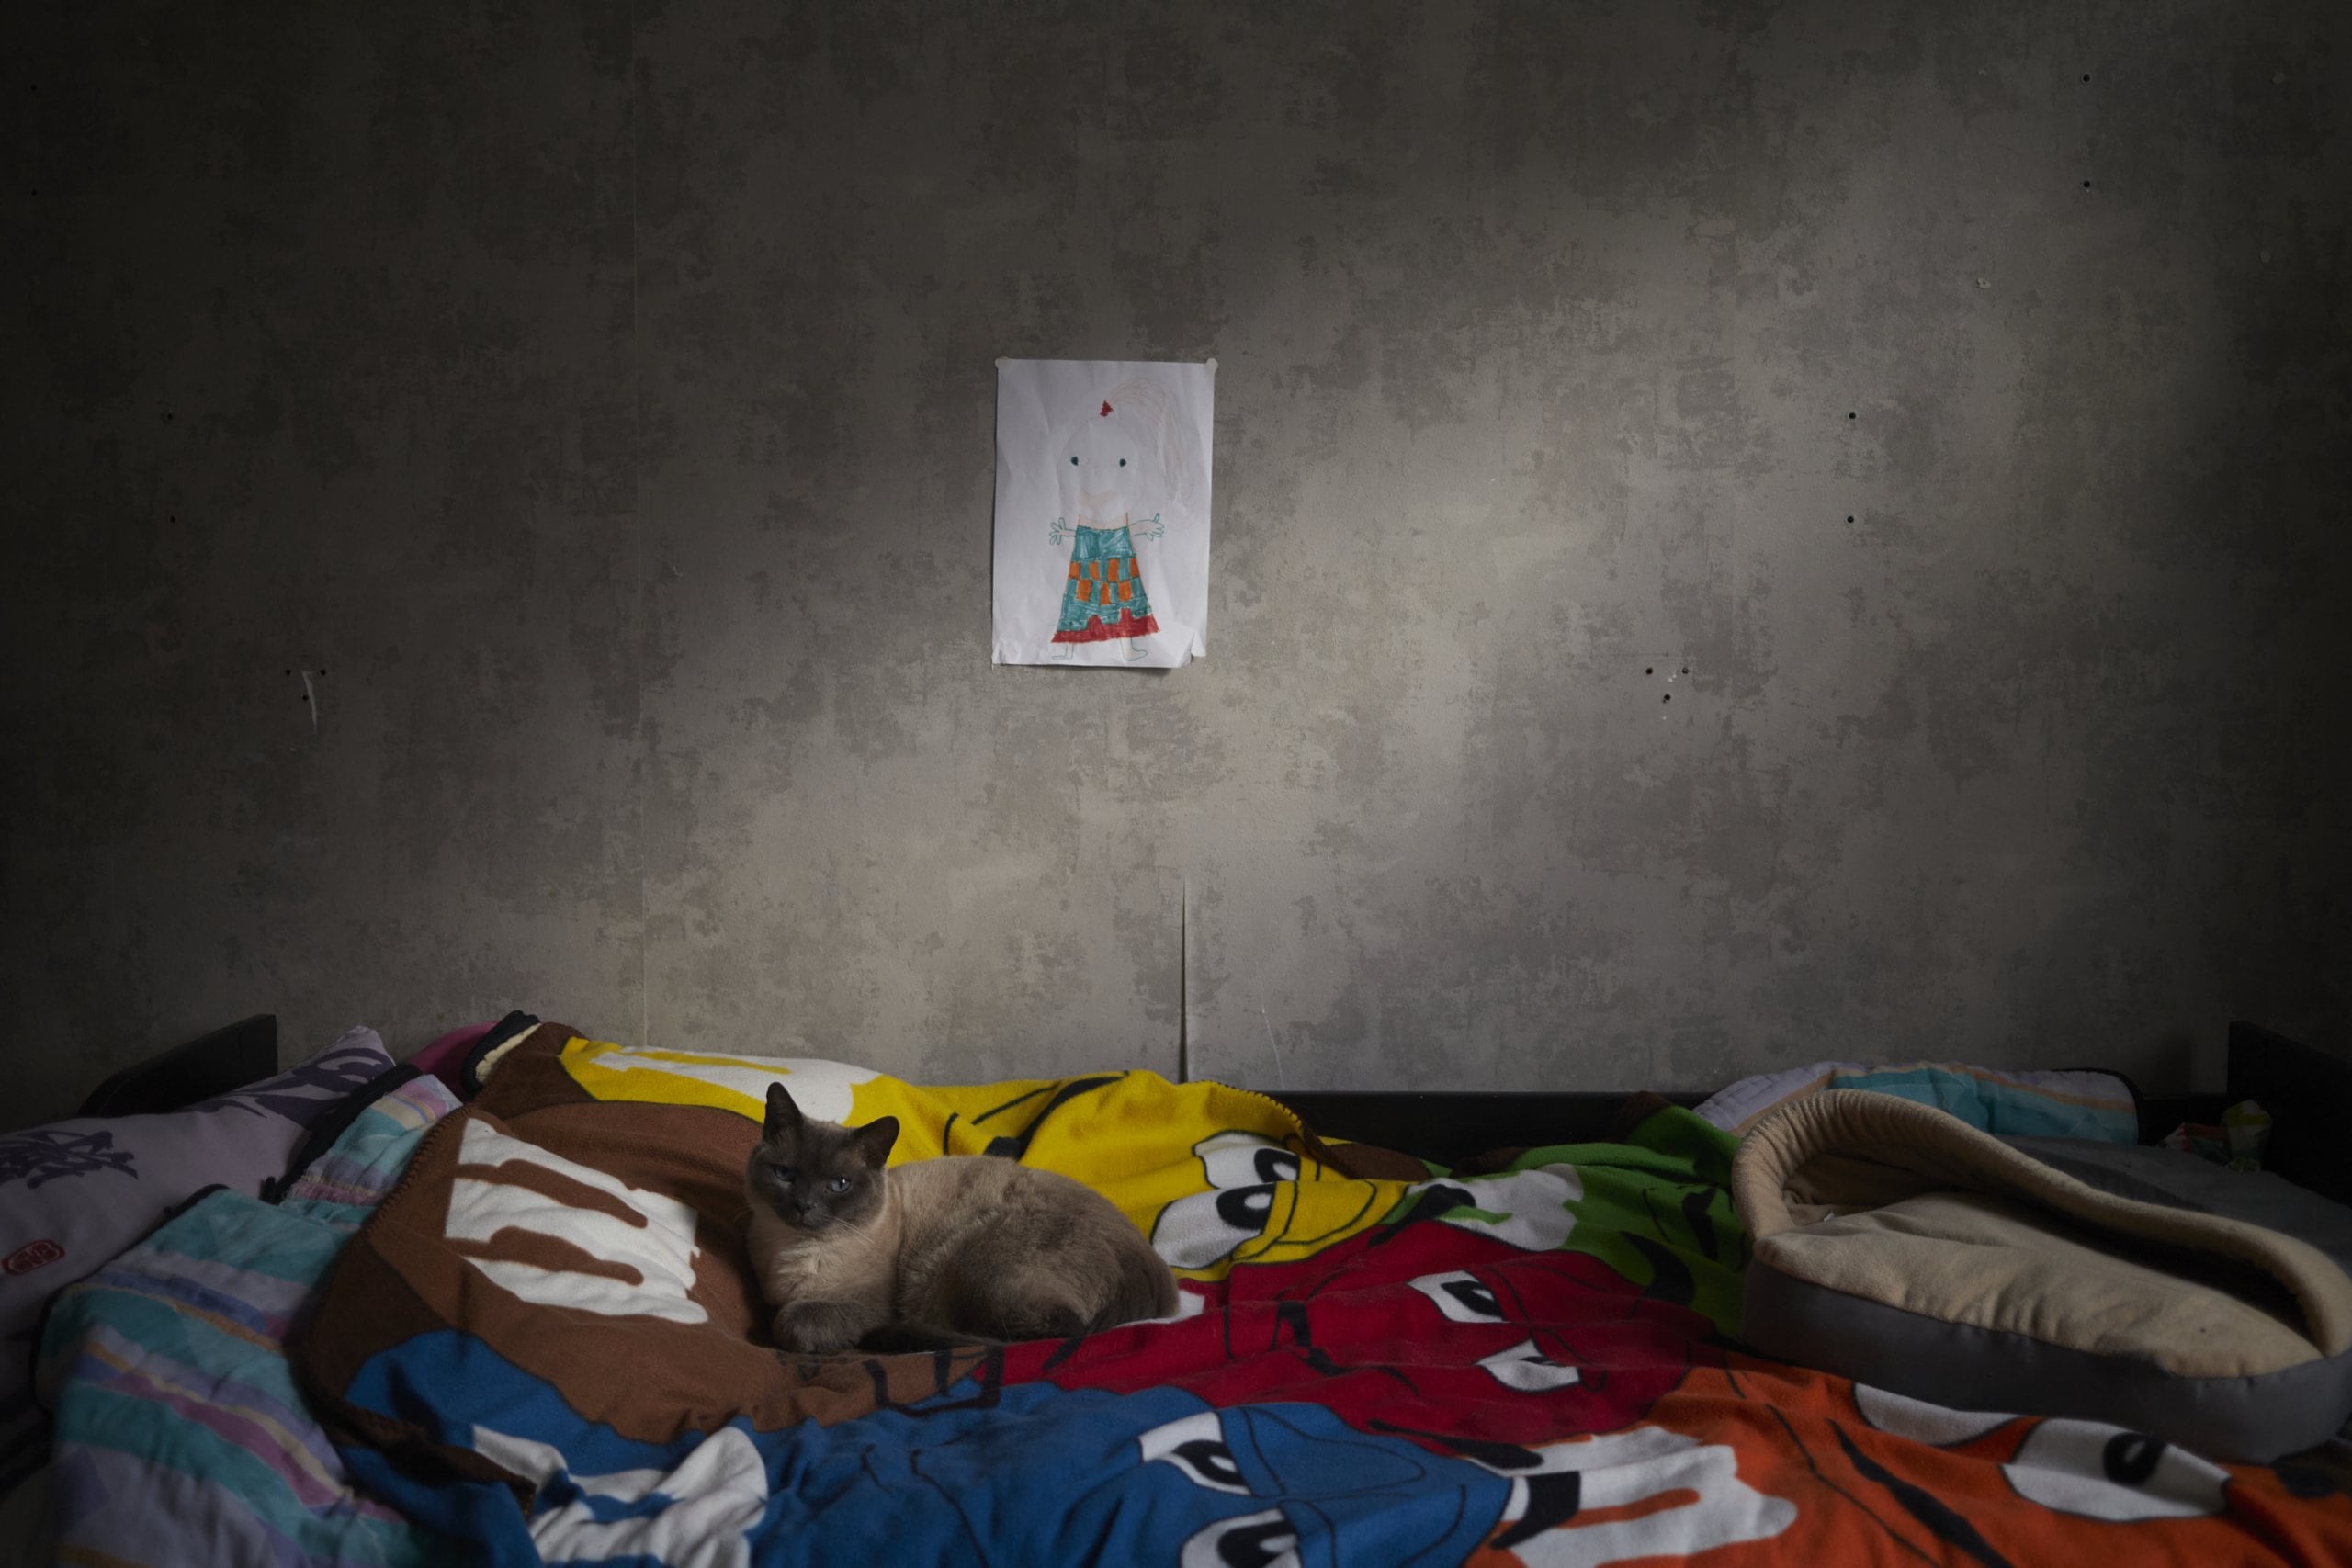 A grey cat laying on a m&m patterned duvet in a bedroom with grey walls, a childrens drawing on the wall above it.